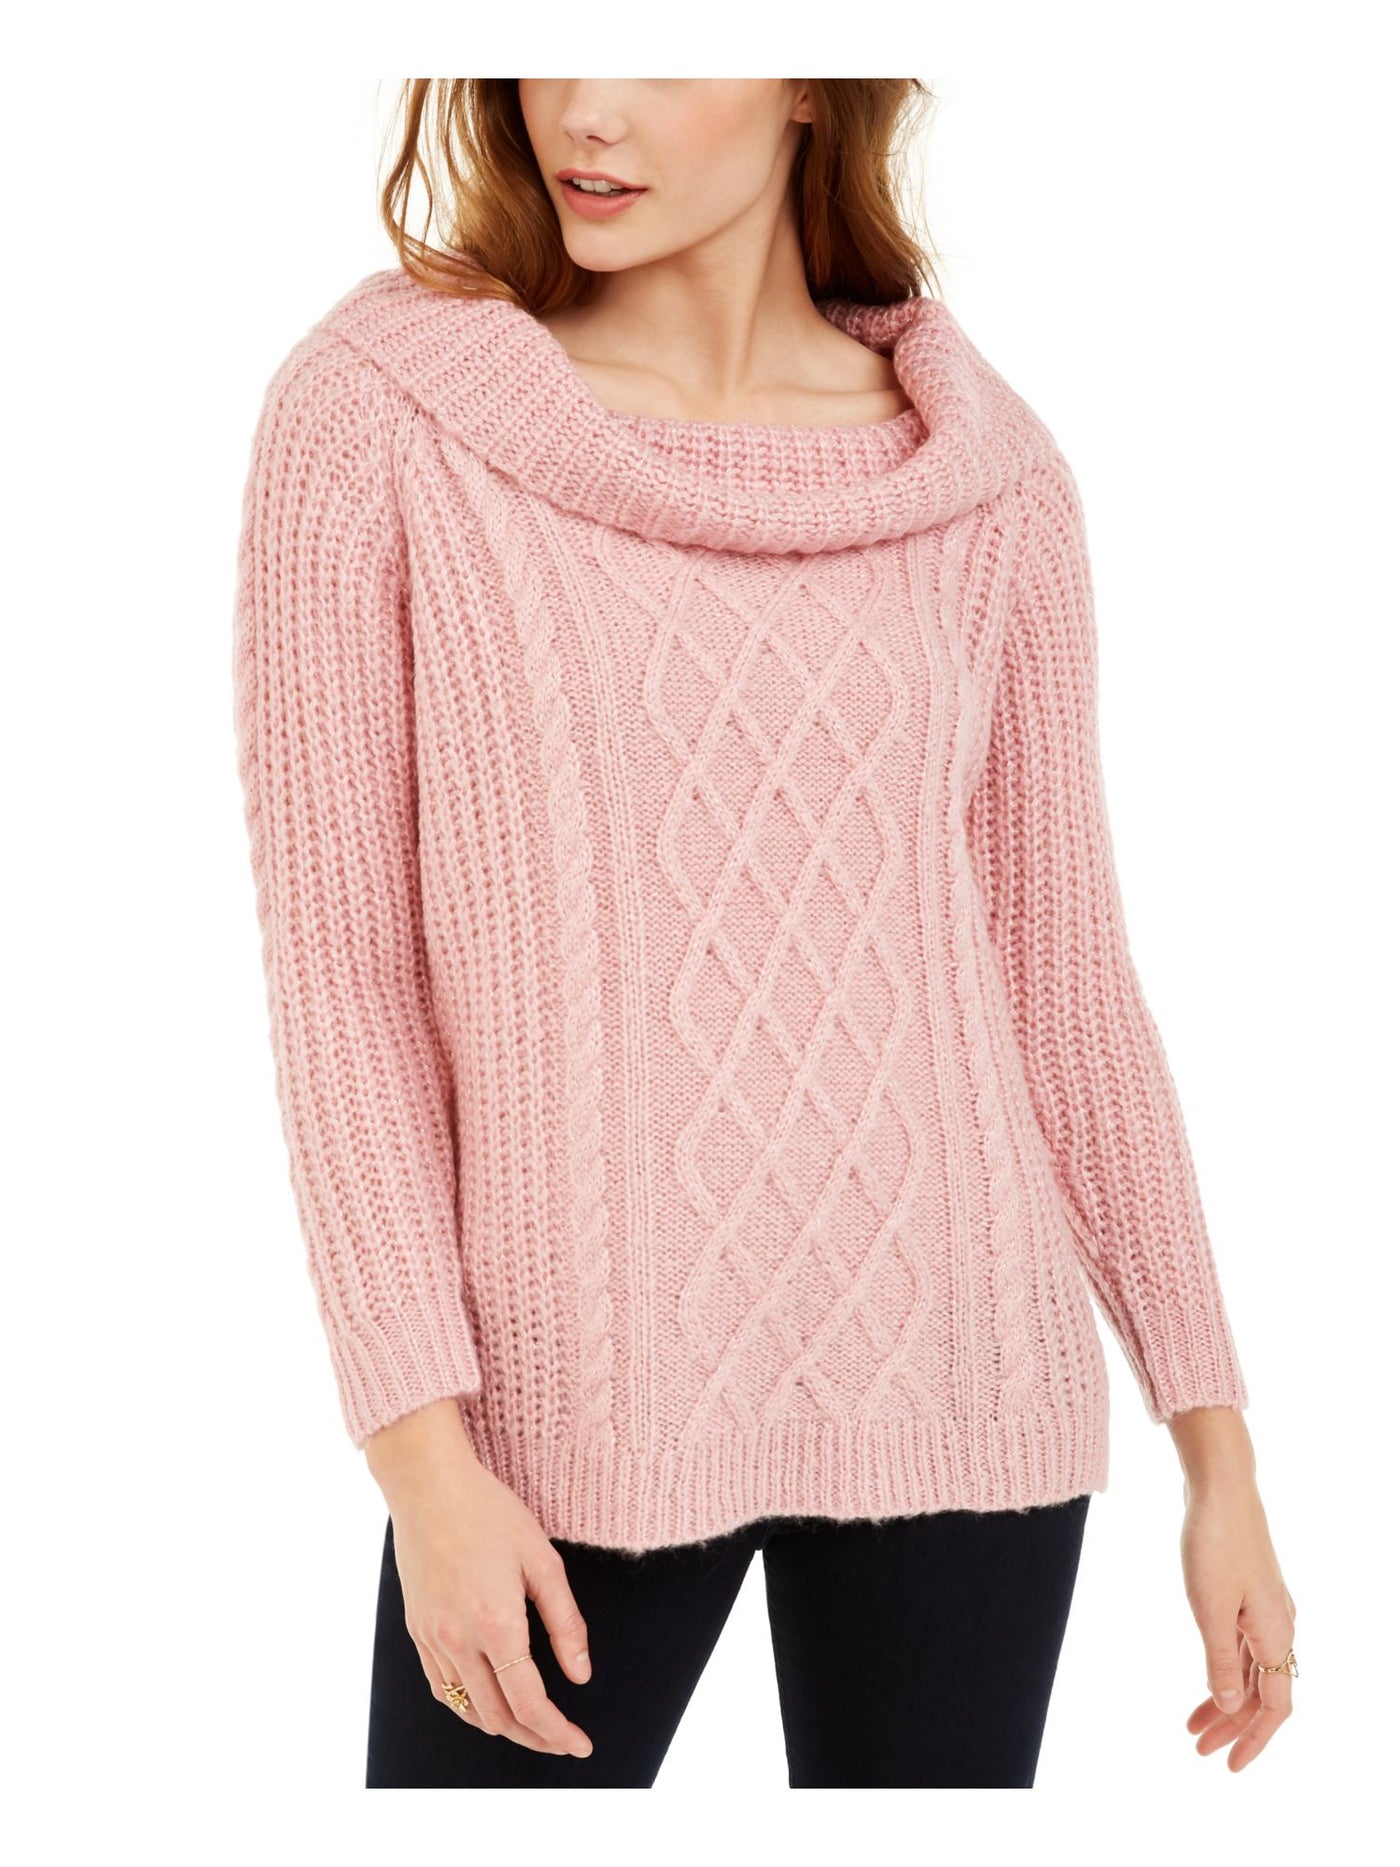 NO COMMENT Womens Pink Textured Patterned Long Sleeve Cowl Neck Sweater Size: L